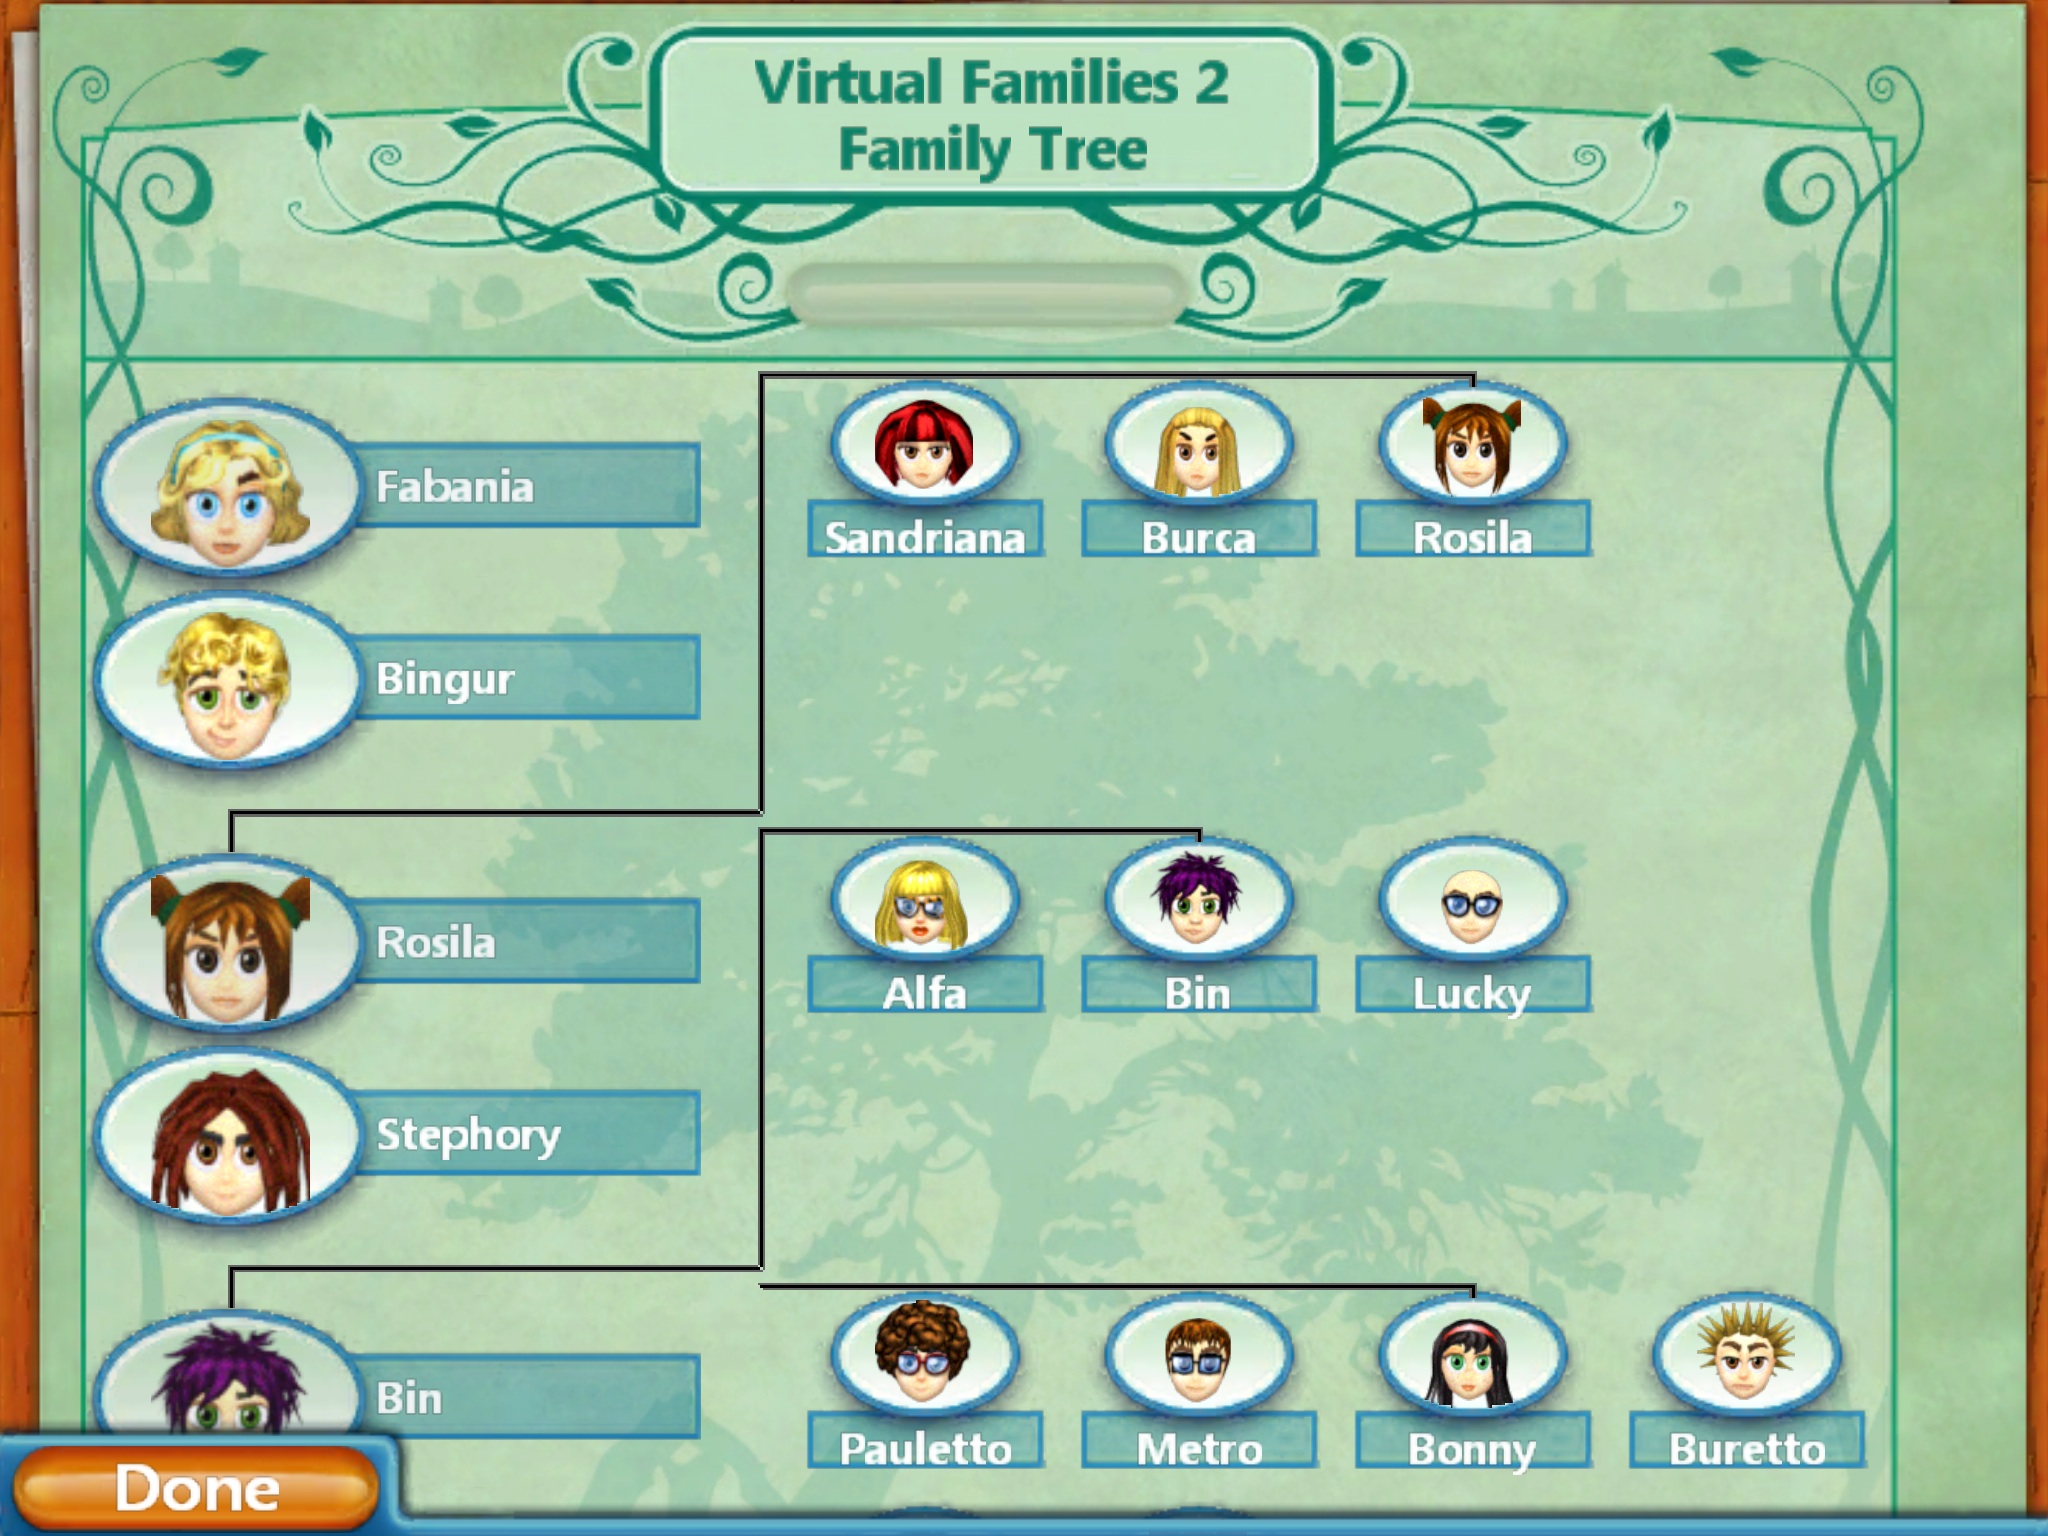 is there a virtual families 3?